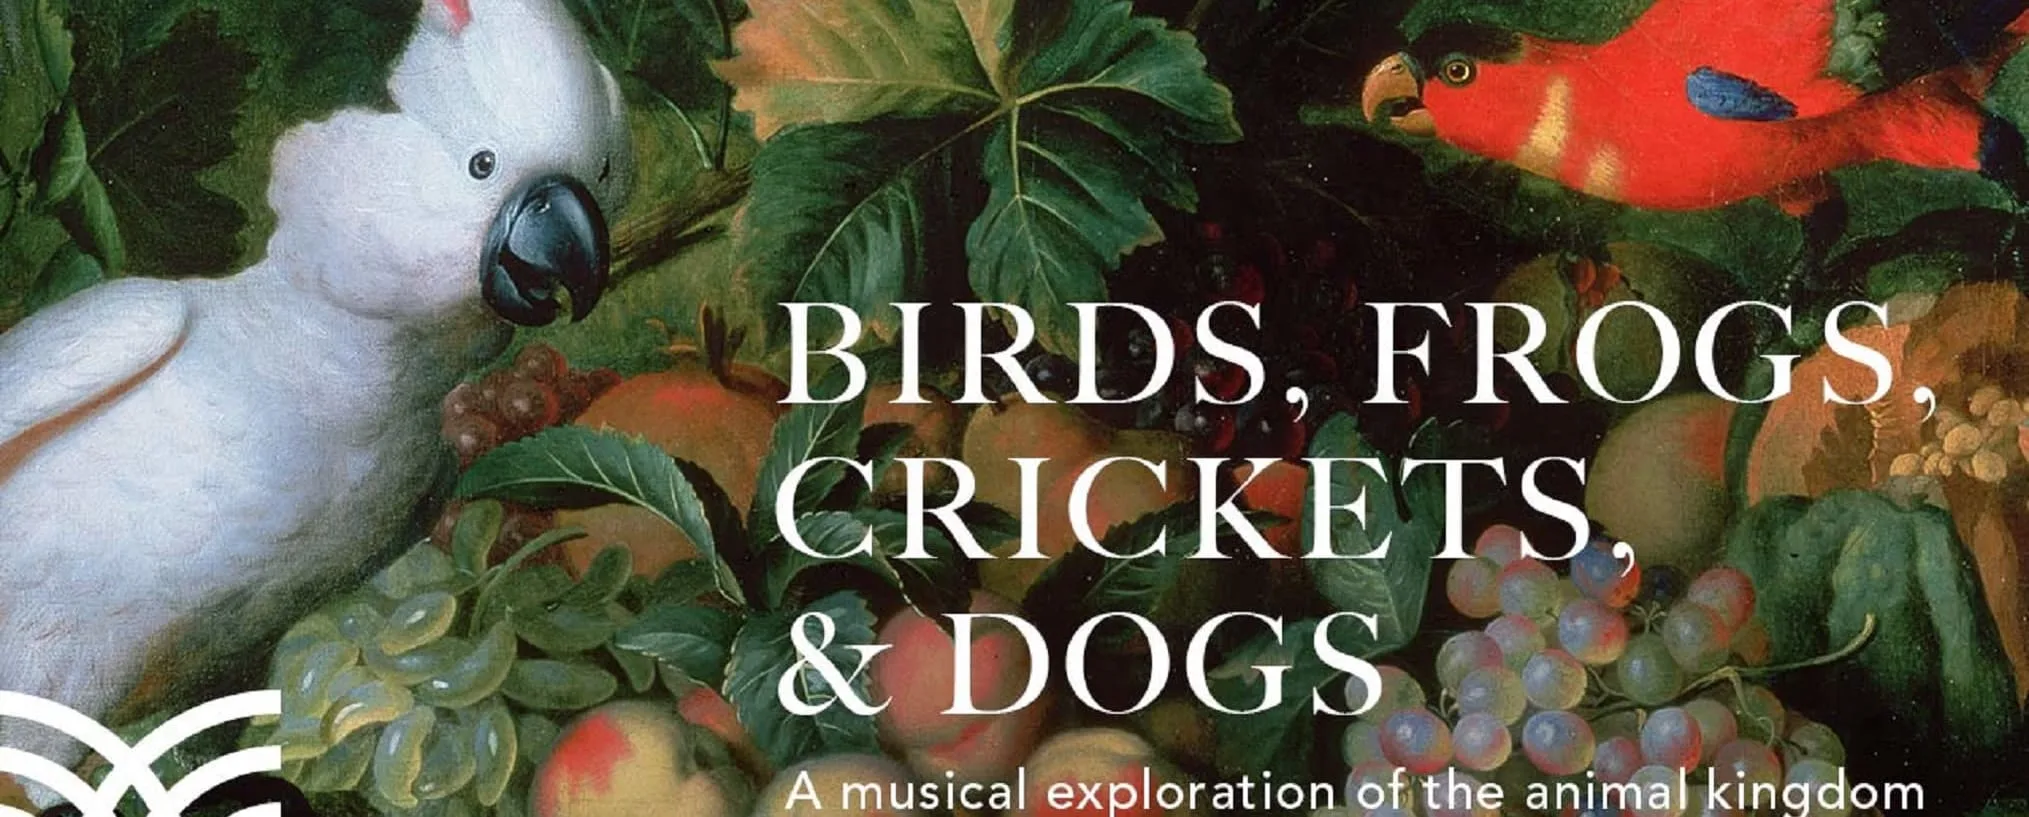 Music of the Baroque: Birds, Frogs, Crickets, & Dogs